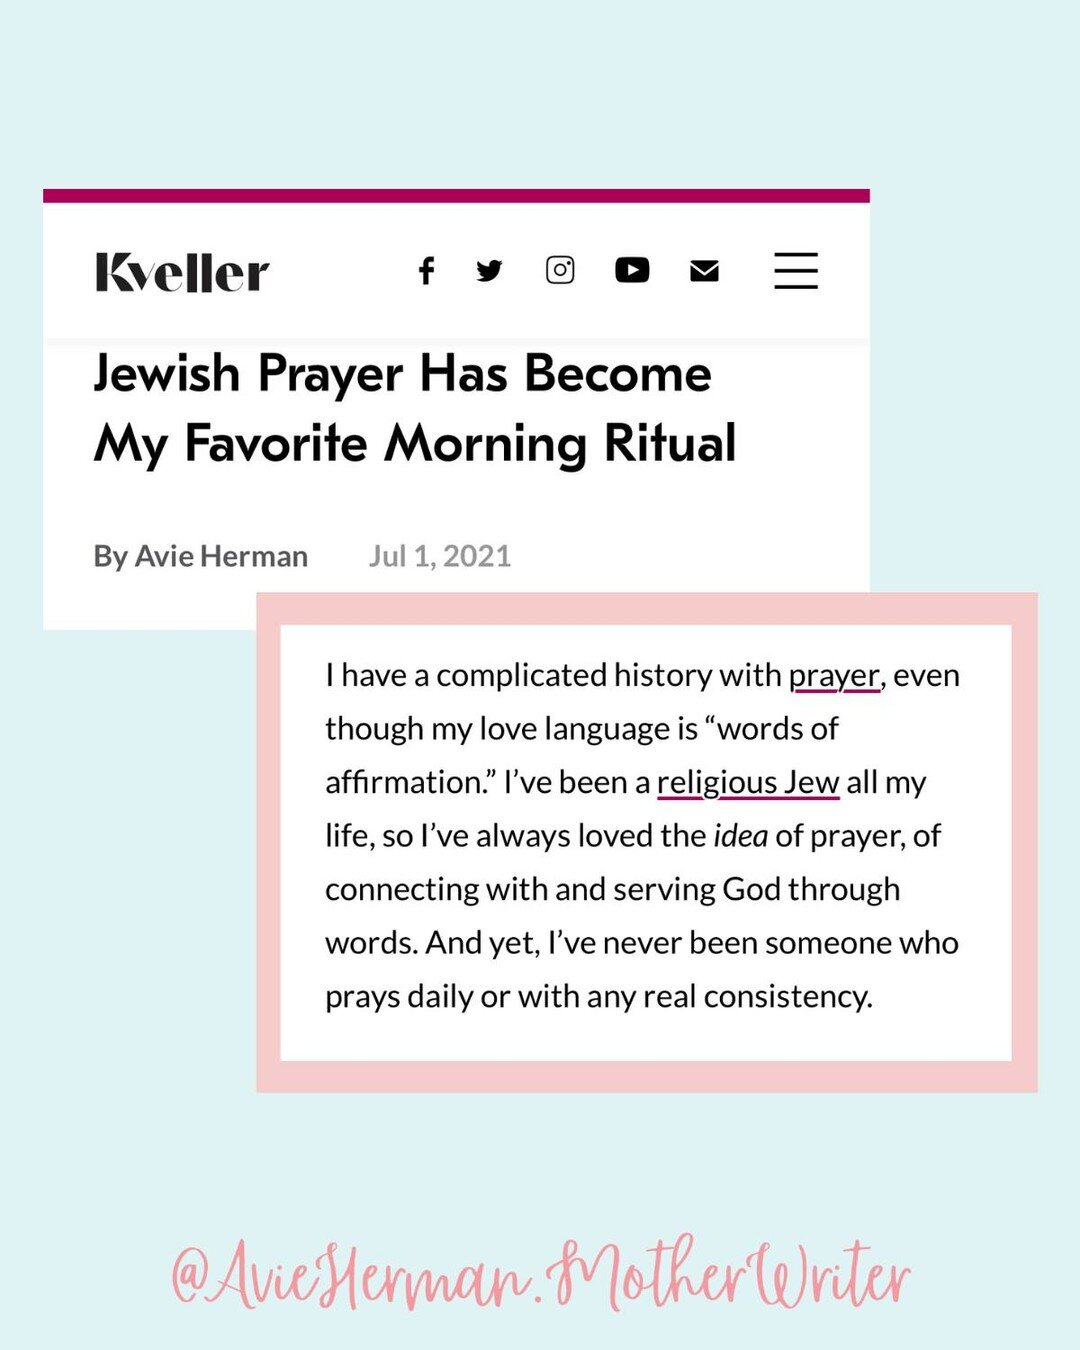 If you publish an article, but forget to share it on Instagram, does it even count??

I wrote and published this a while ago, but never shared it, so here it is!

Some thoughts on davening, perfectionism and being enough. 

#jewish #jewishmama #jewis